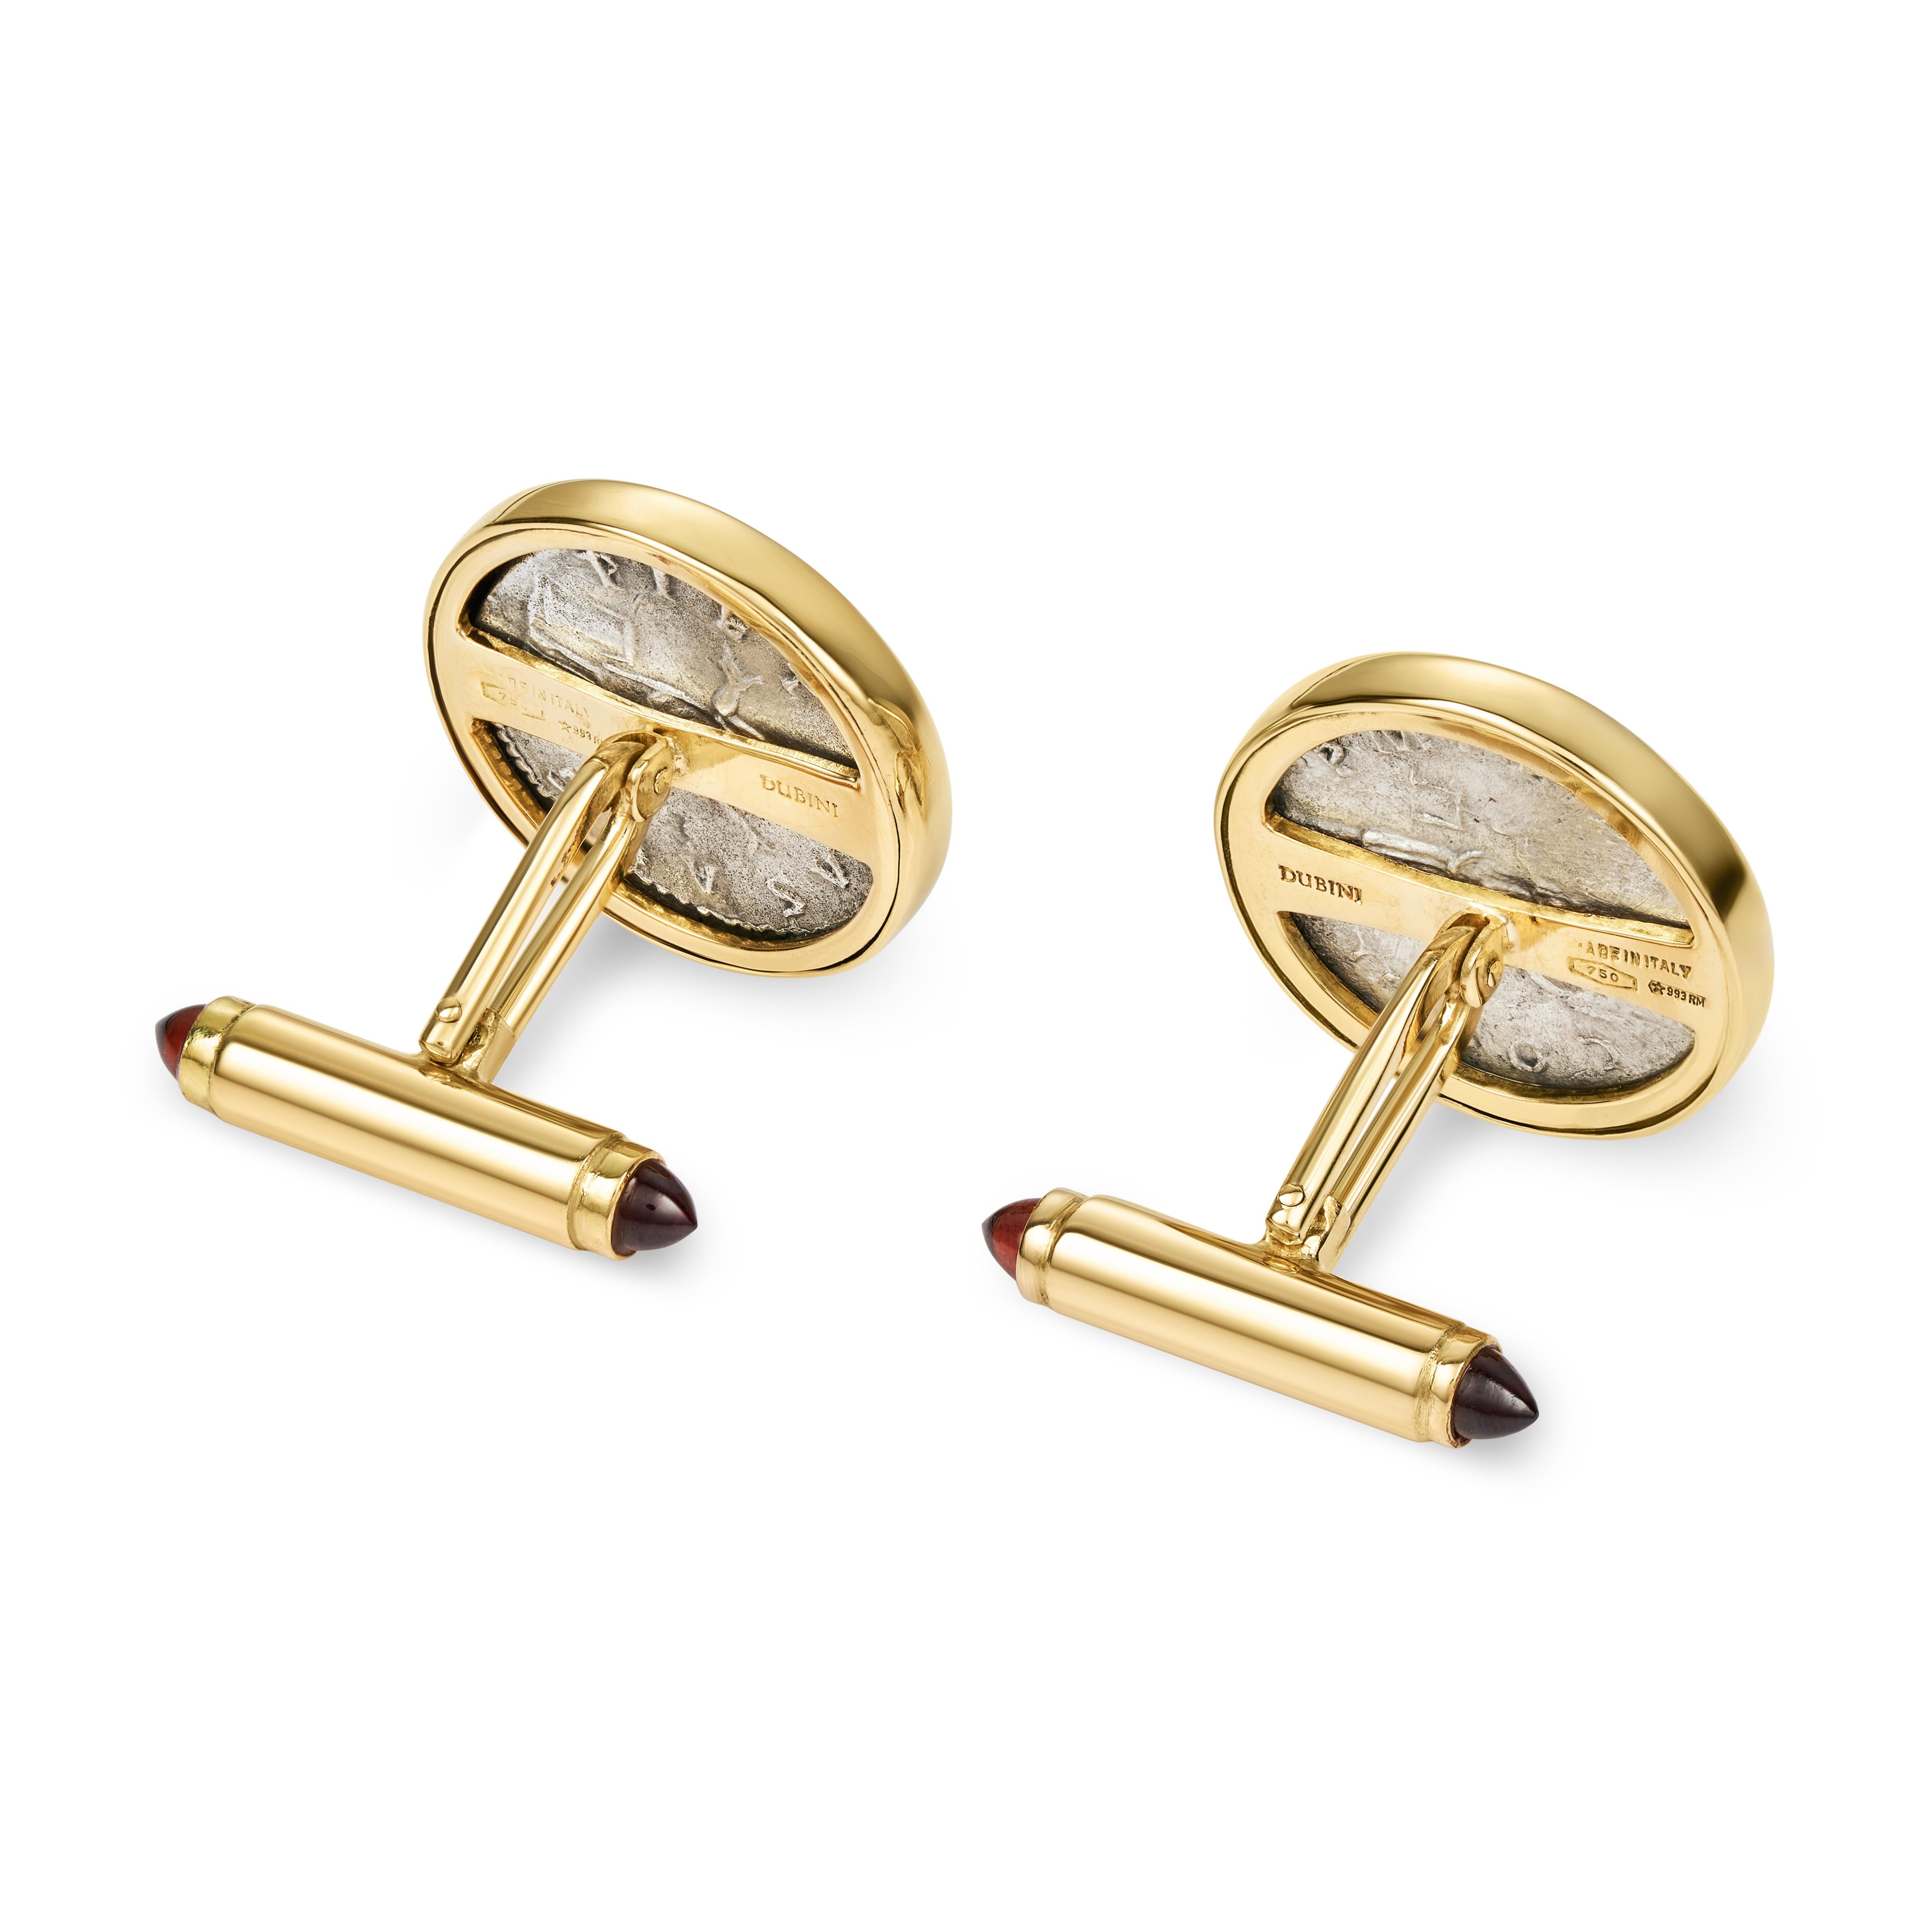 These DUBINI coin cufflinks from the 'Empires' collection feature authentic Roman Imperial coins minted circa A.D. 133-135 set in 18K yellow gold with garnet cabochons.

HISTORY

Hadrian (l. A.D. 78-138) was emperor of Rome (r. A.D. 117-138) and is